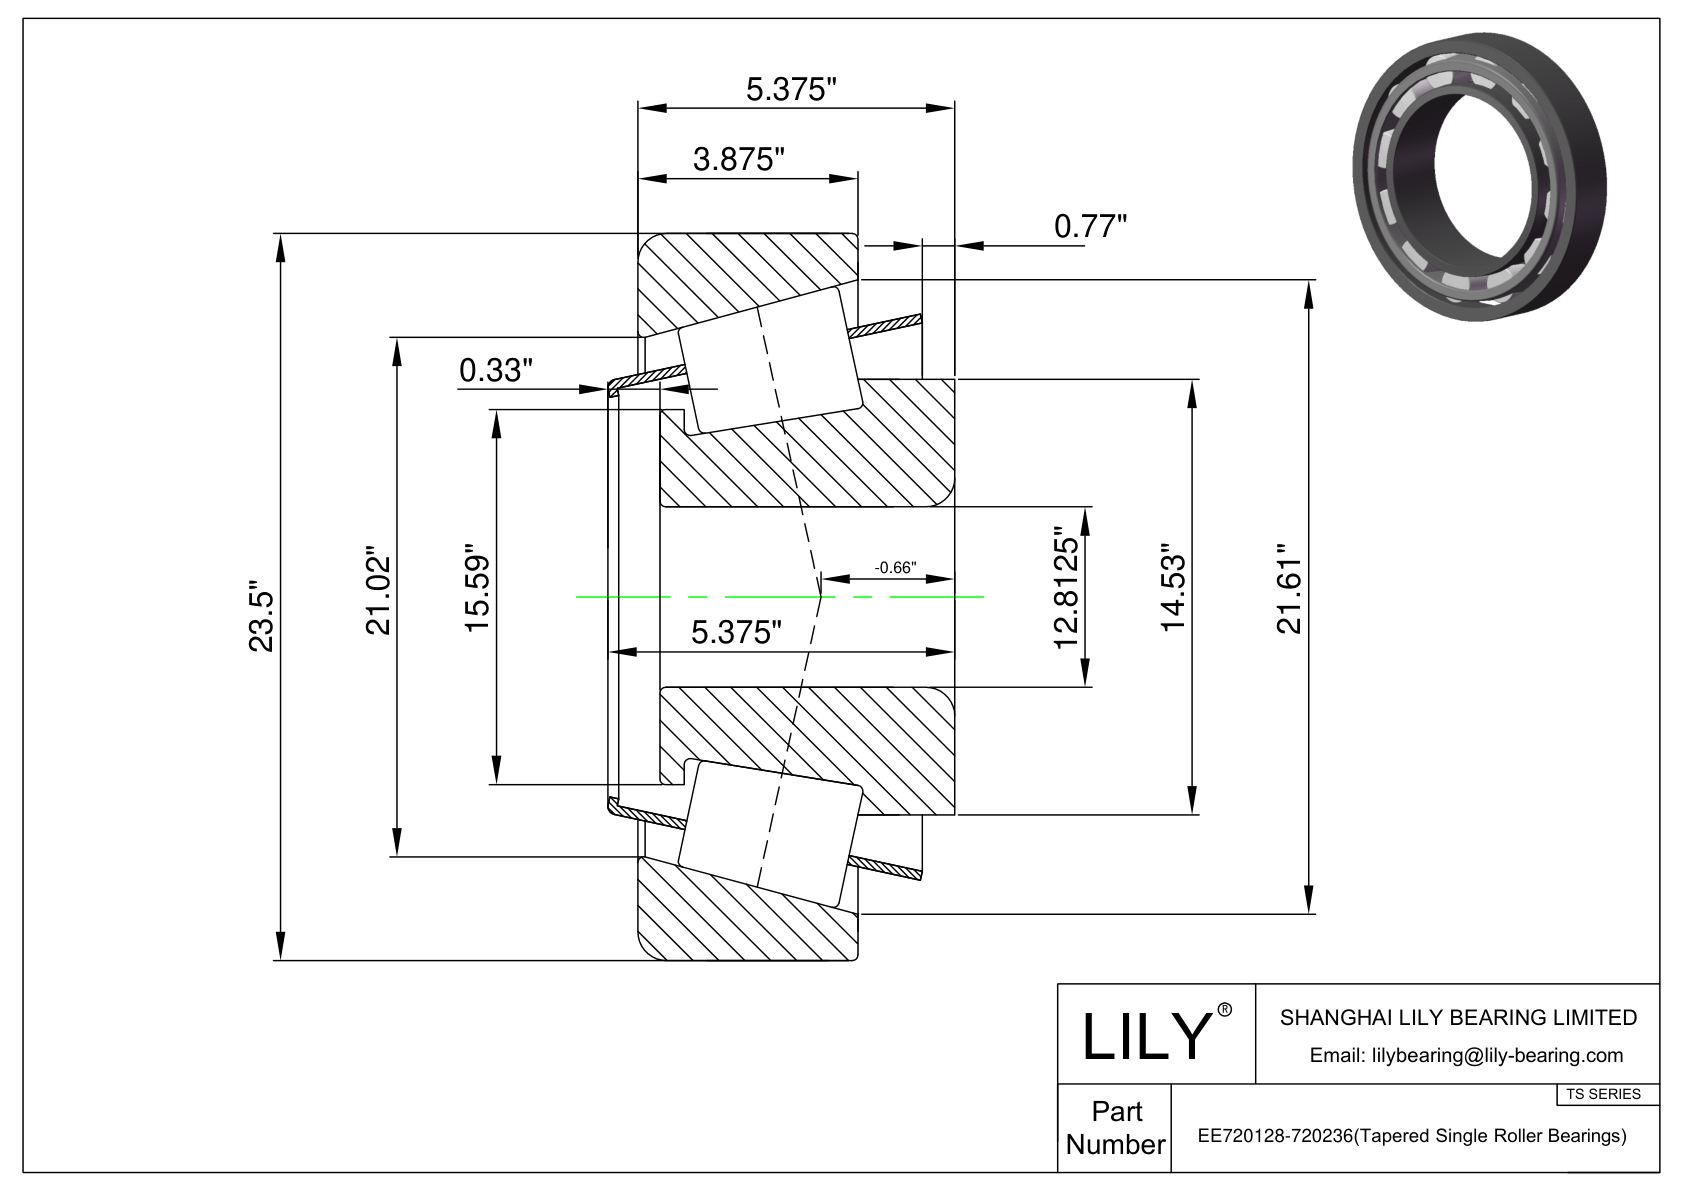 EE720128-720236 TS (Tapered Single Roller Bearings) (Imperial) cad drawing